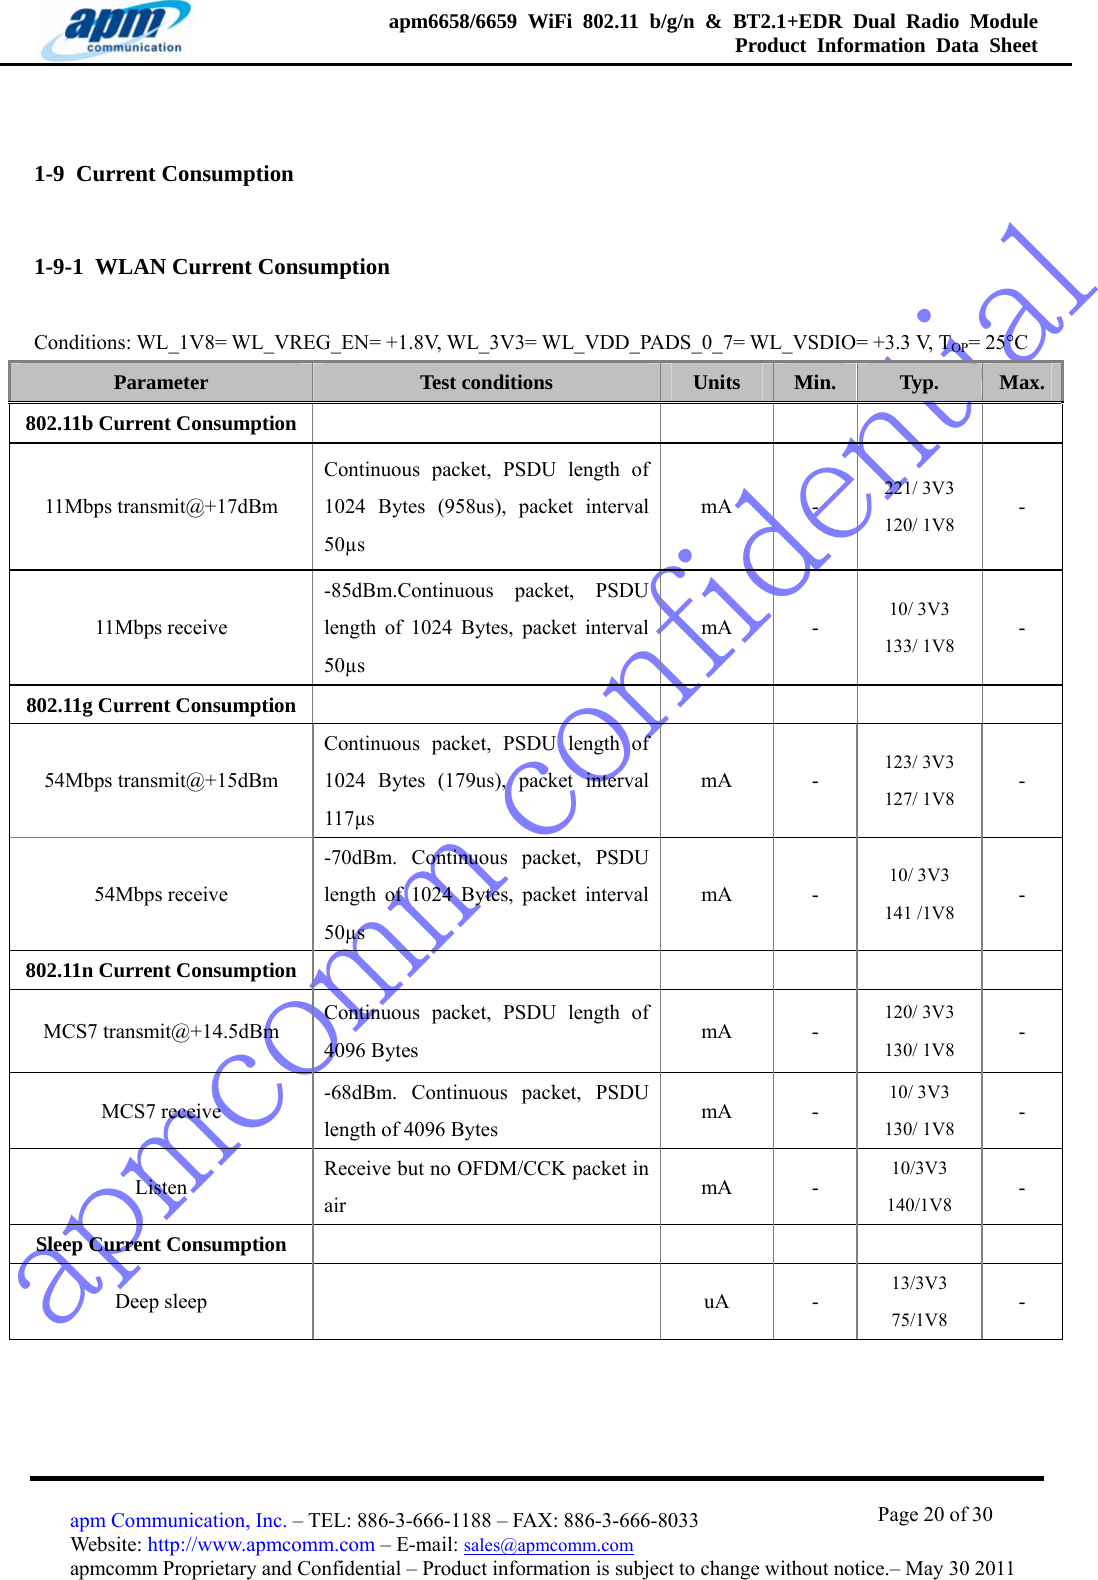 apmcomm confidentialapm6658/6659 WiFi 802.11 b/g/n &amp; BT2.1+EDR Dual Radio Module  Product Information Data Sheet                                       Page 20 of 30 apm Communication, Inc. – TEL: 886-3-666-1188 – FAX: 886-3-666-8033 Website: http://www.apmcomm.com – E-mail: sales@apmcomm.com  apmcomm Proprietary and Confidential – Product information is subject to change without notice.– May 30 2011 1-9  Current Consumption   1-9-1  WLAN Current Consumption Conditions: WL_1V8= WL_VREG_EN= +1.8V, WL_3V3= WL_VDD_PADS_0_7= WL_VSDIO= +3.3 V, TOP= 25°C Parameter  Test conditions  Units  Min.  Typ.  Max.802.11b Current Consumption      11Mbps transmit@+17dBm Continuous packet, PSDU length of 1024 Bytes (958us), packet interval 50µs mA - 221/ 3V3 120/ 1V8 - 11Mbps receive -85dBm.Continuous packet, PSDU length of 1024 Bytes, packet interval 50µs mA - 10/ 3V3 133/ 1V8 - 802.11g Current Consumption      54Mbps transmit@+15dBm Continuous packet, PSDU length of 1024 Bytes (179us), packet interval 117µs mA - 123/ 3V3 127/ 1V8 - 54Mbps receive -70dBm. Continuous packet, PSDU length of 1024 Bytes, packet interval 50µs mA - 10/ 3V3 141 /1V8 - 802.11n Current Consumption      MCS7 transmit@+14.5dBm  Continuous packet, PSDU length of 4096 Bytes  mA - 120/ 3V3 130/ 1V8 - MCS7 receive  -68dBm. Continuous packet, PSDU length of 4096 Bytes  mA - 10/ 3V3 130/ 1V8 - Listen  Receive but no OFDM/CCK packet in air  mA - 10/3V3 140/1V8 - Sleep Current Consumption      Deep sleep    uA  - 13/3V3 75/1V8 -  